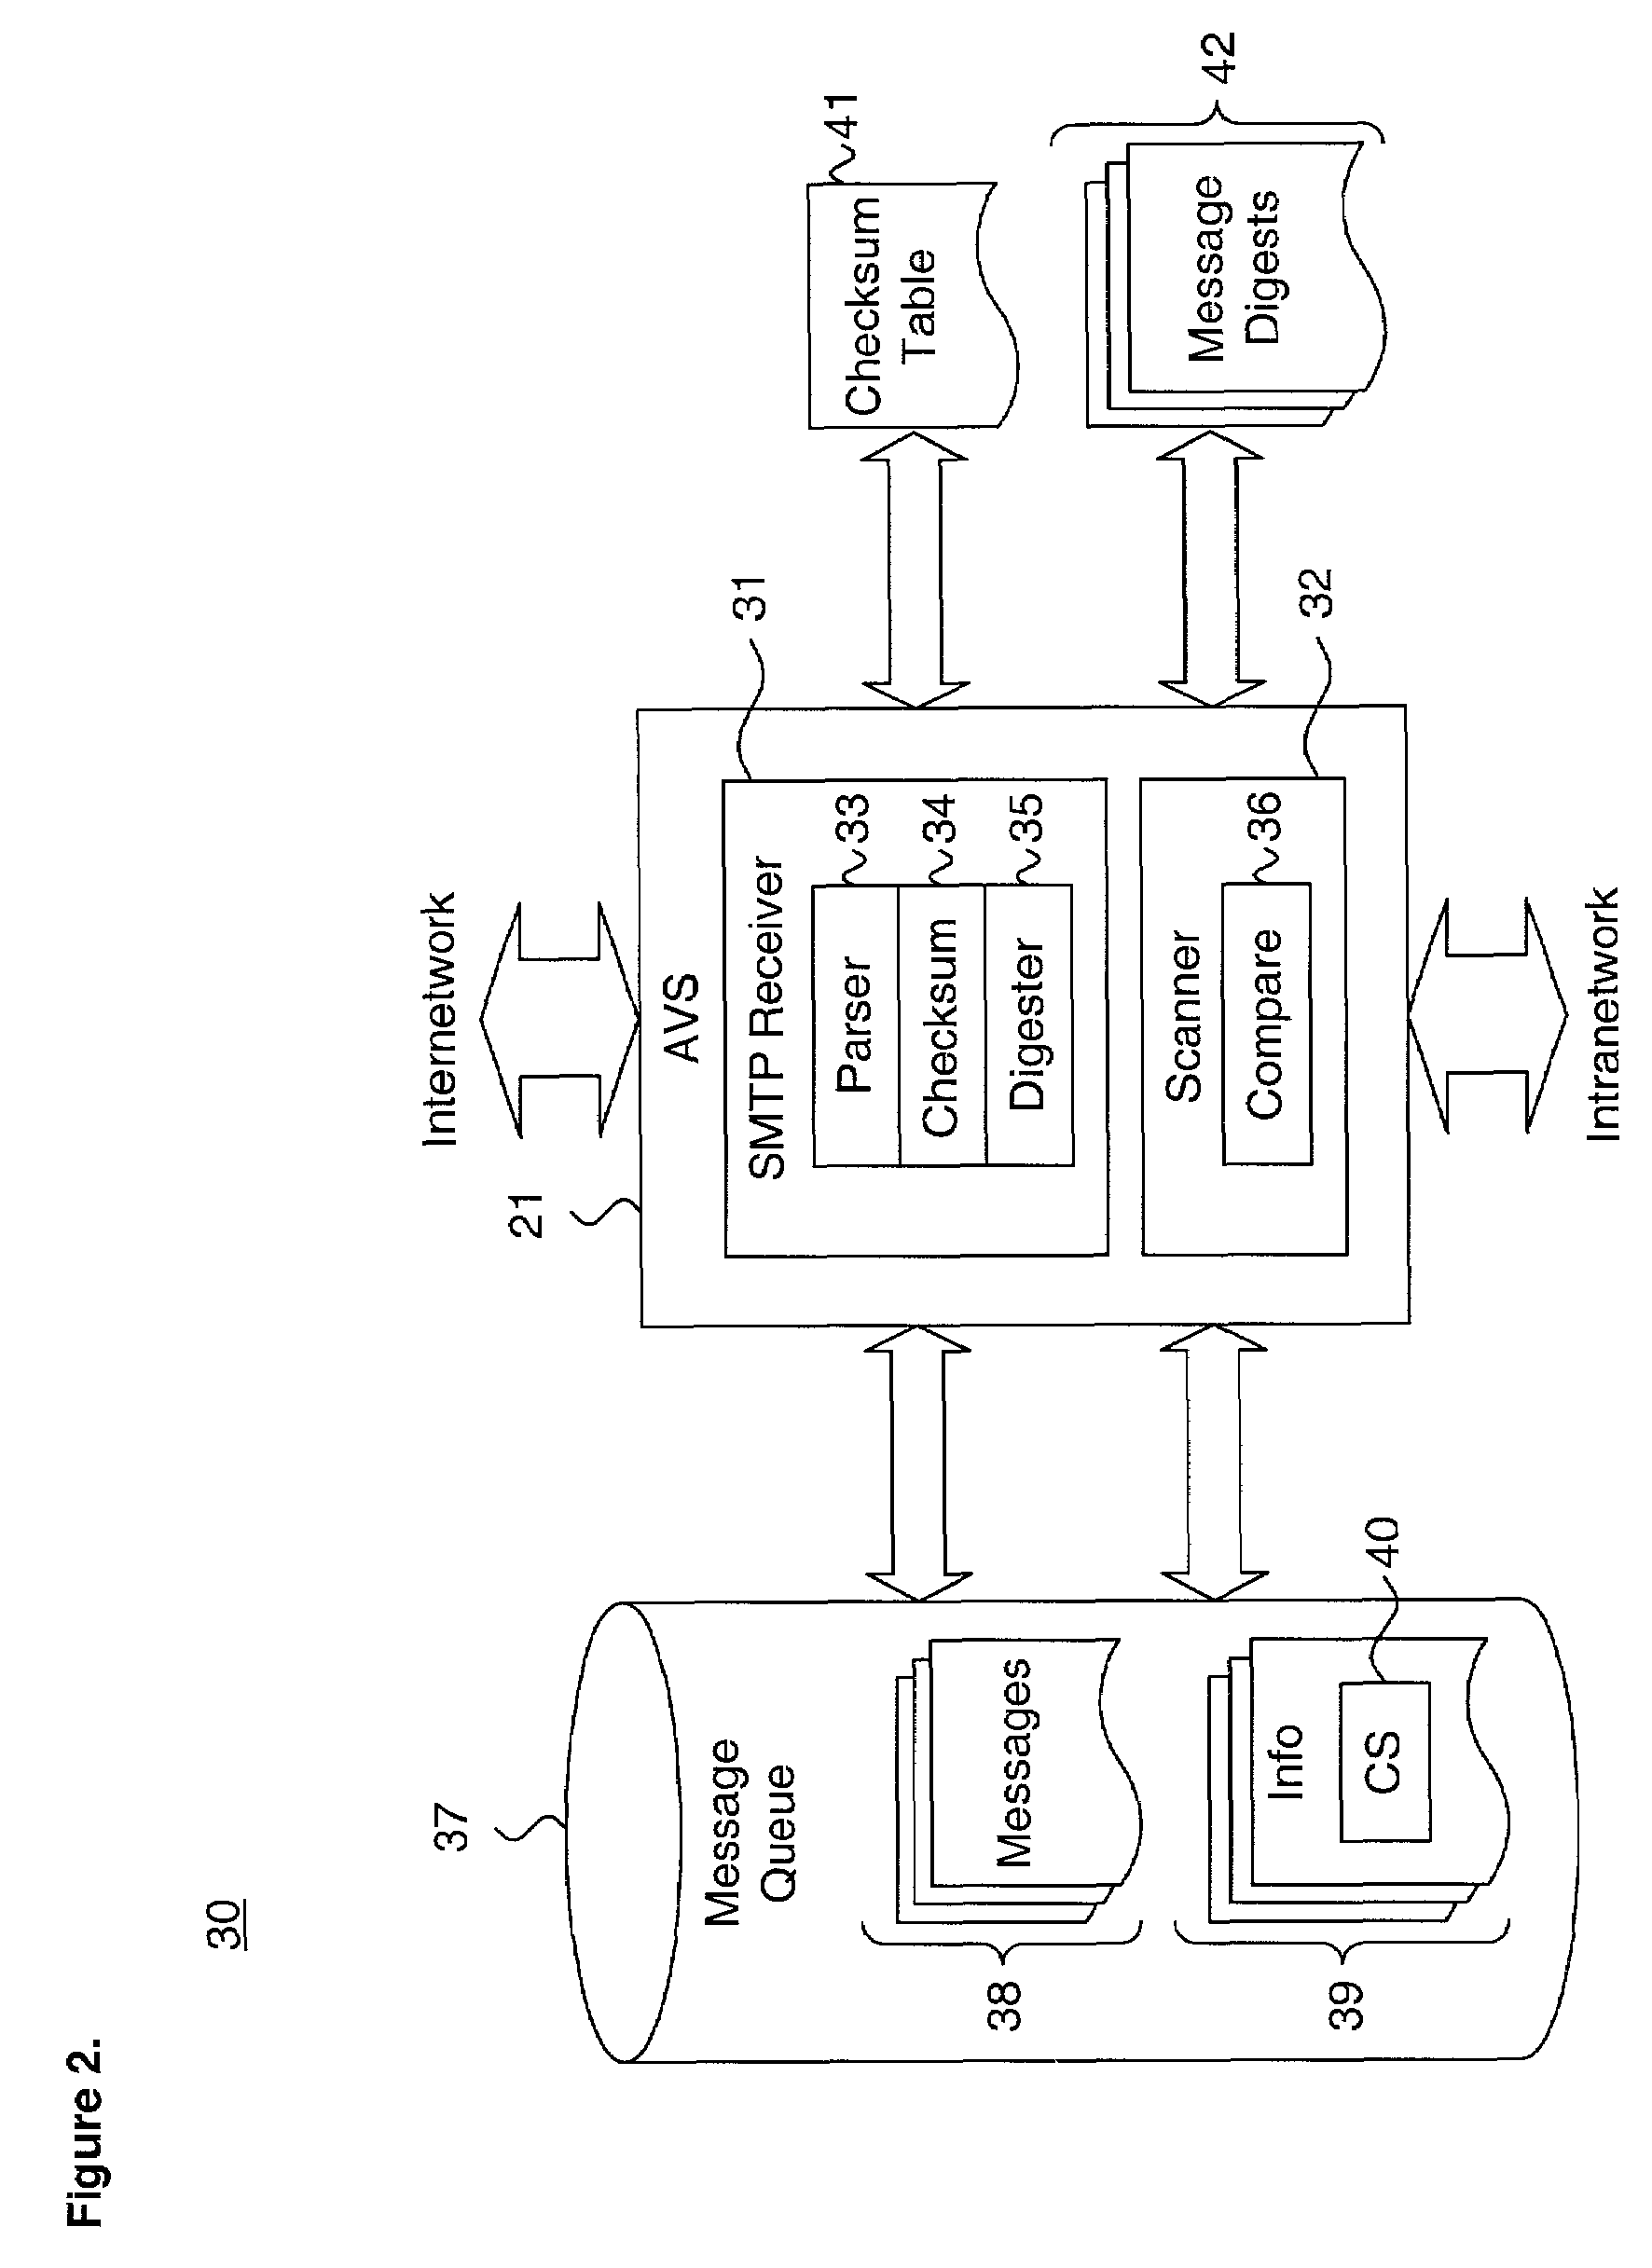 System and method for performing efficient computer virus scanning of transient messages using checksums in a distributed computing environment